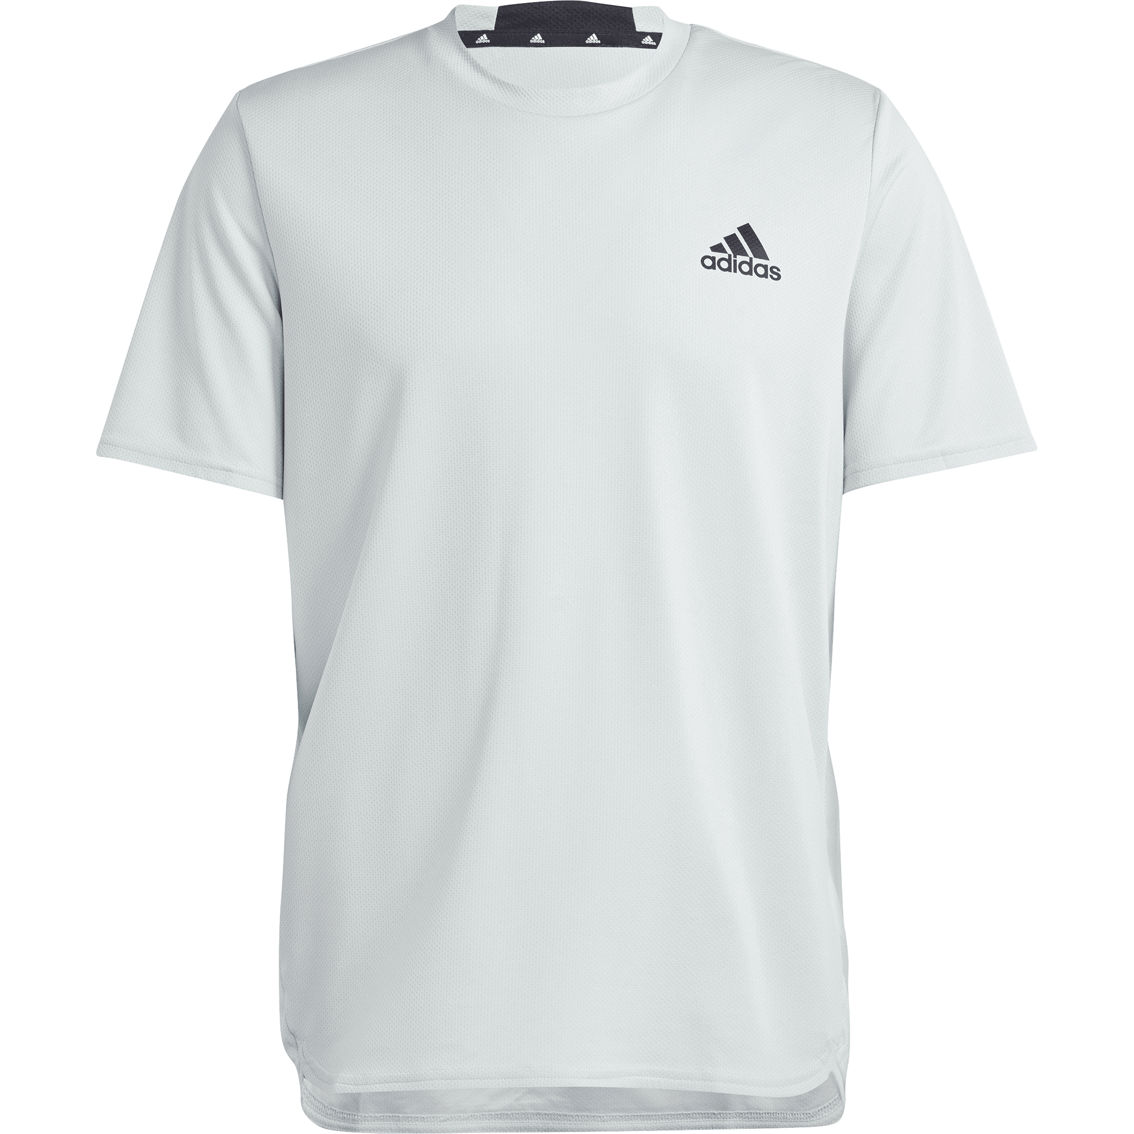 adidas Designed for Movement Tee - Image 6 of 6